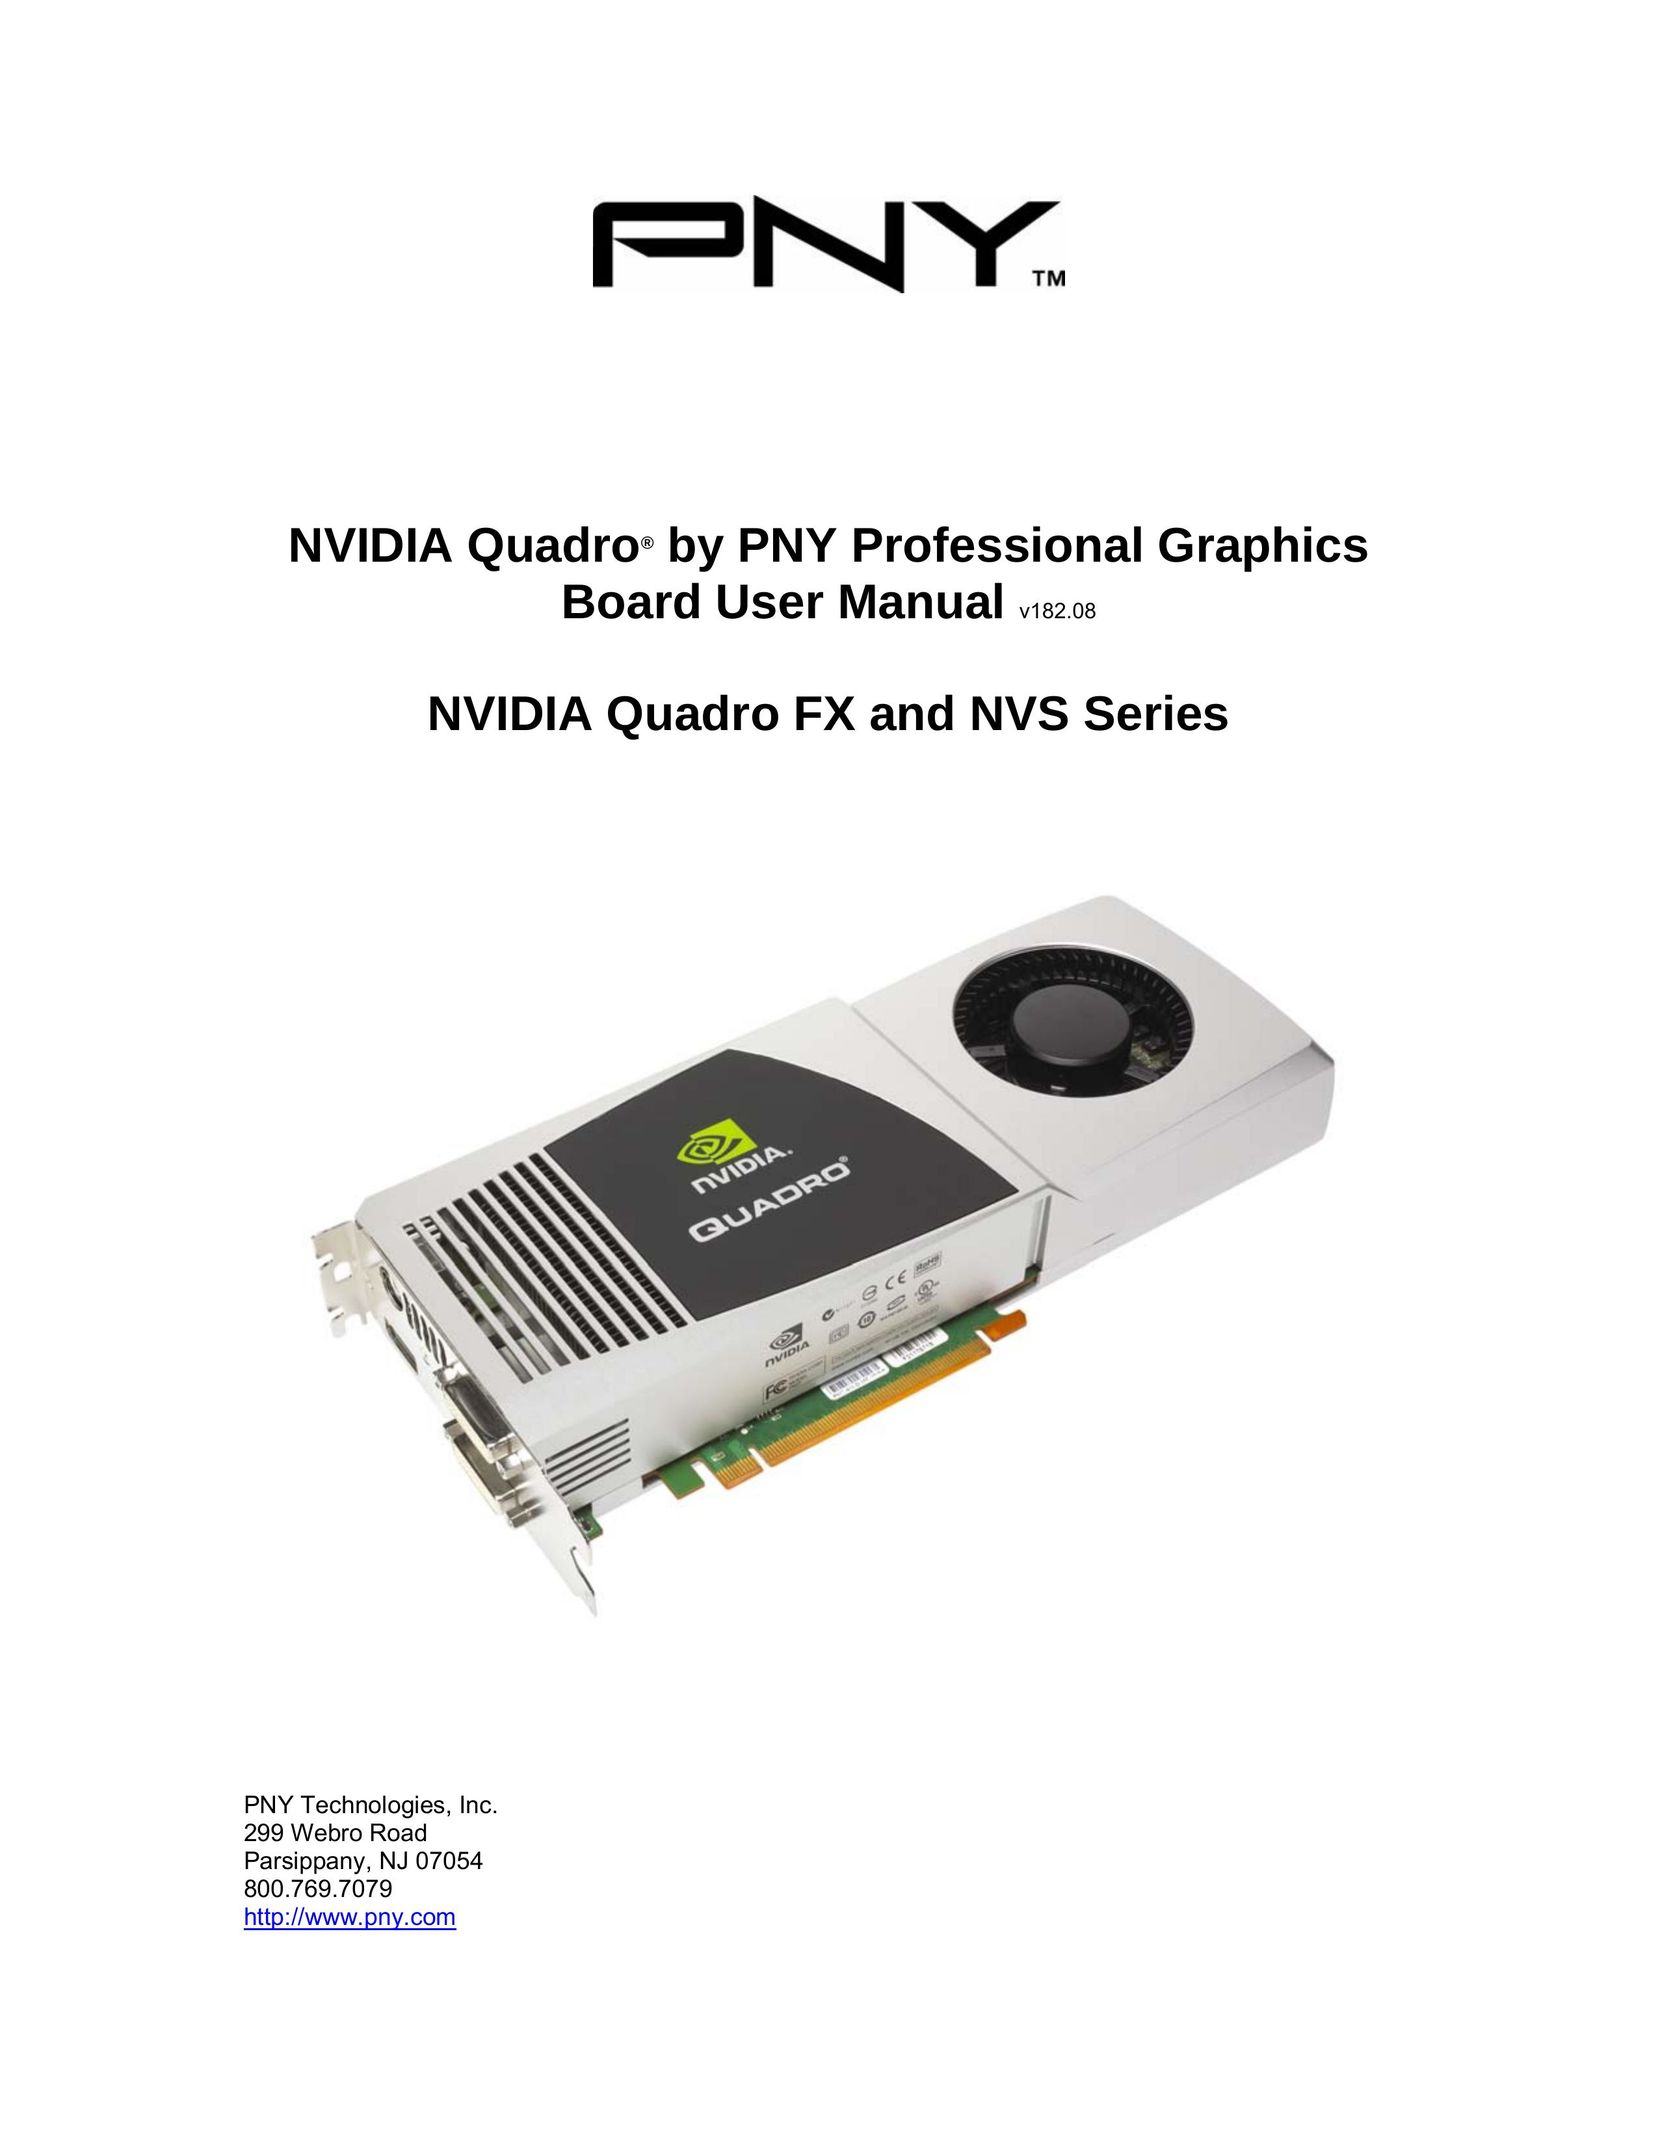 PNY FX 1700 Computer Hardware User Manual